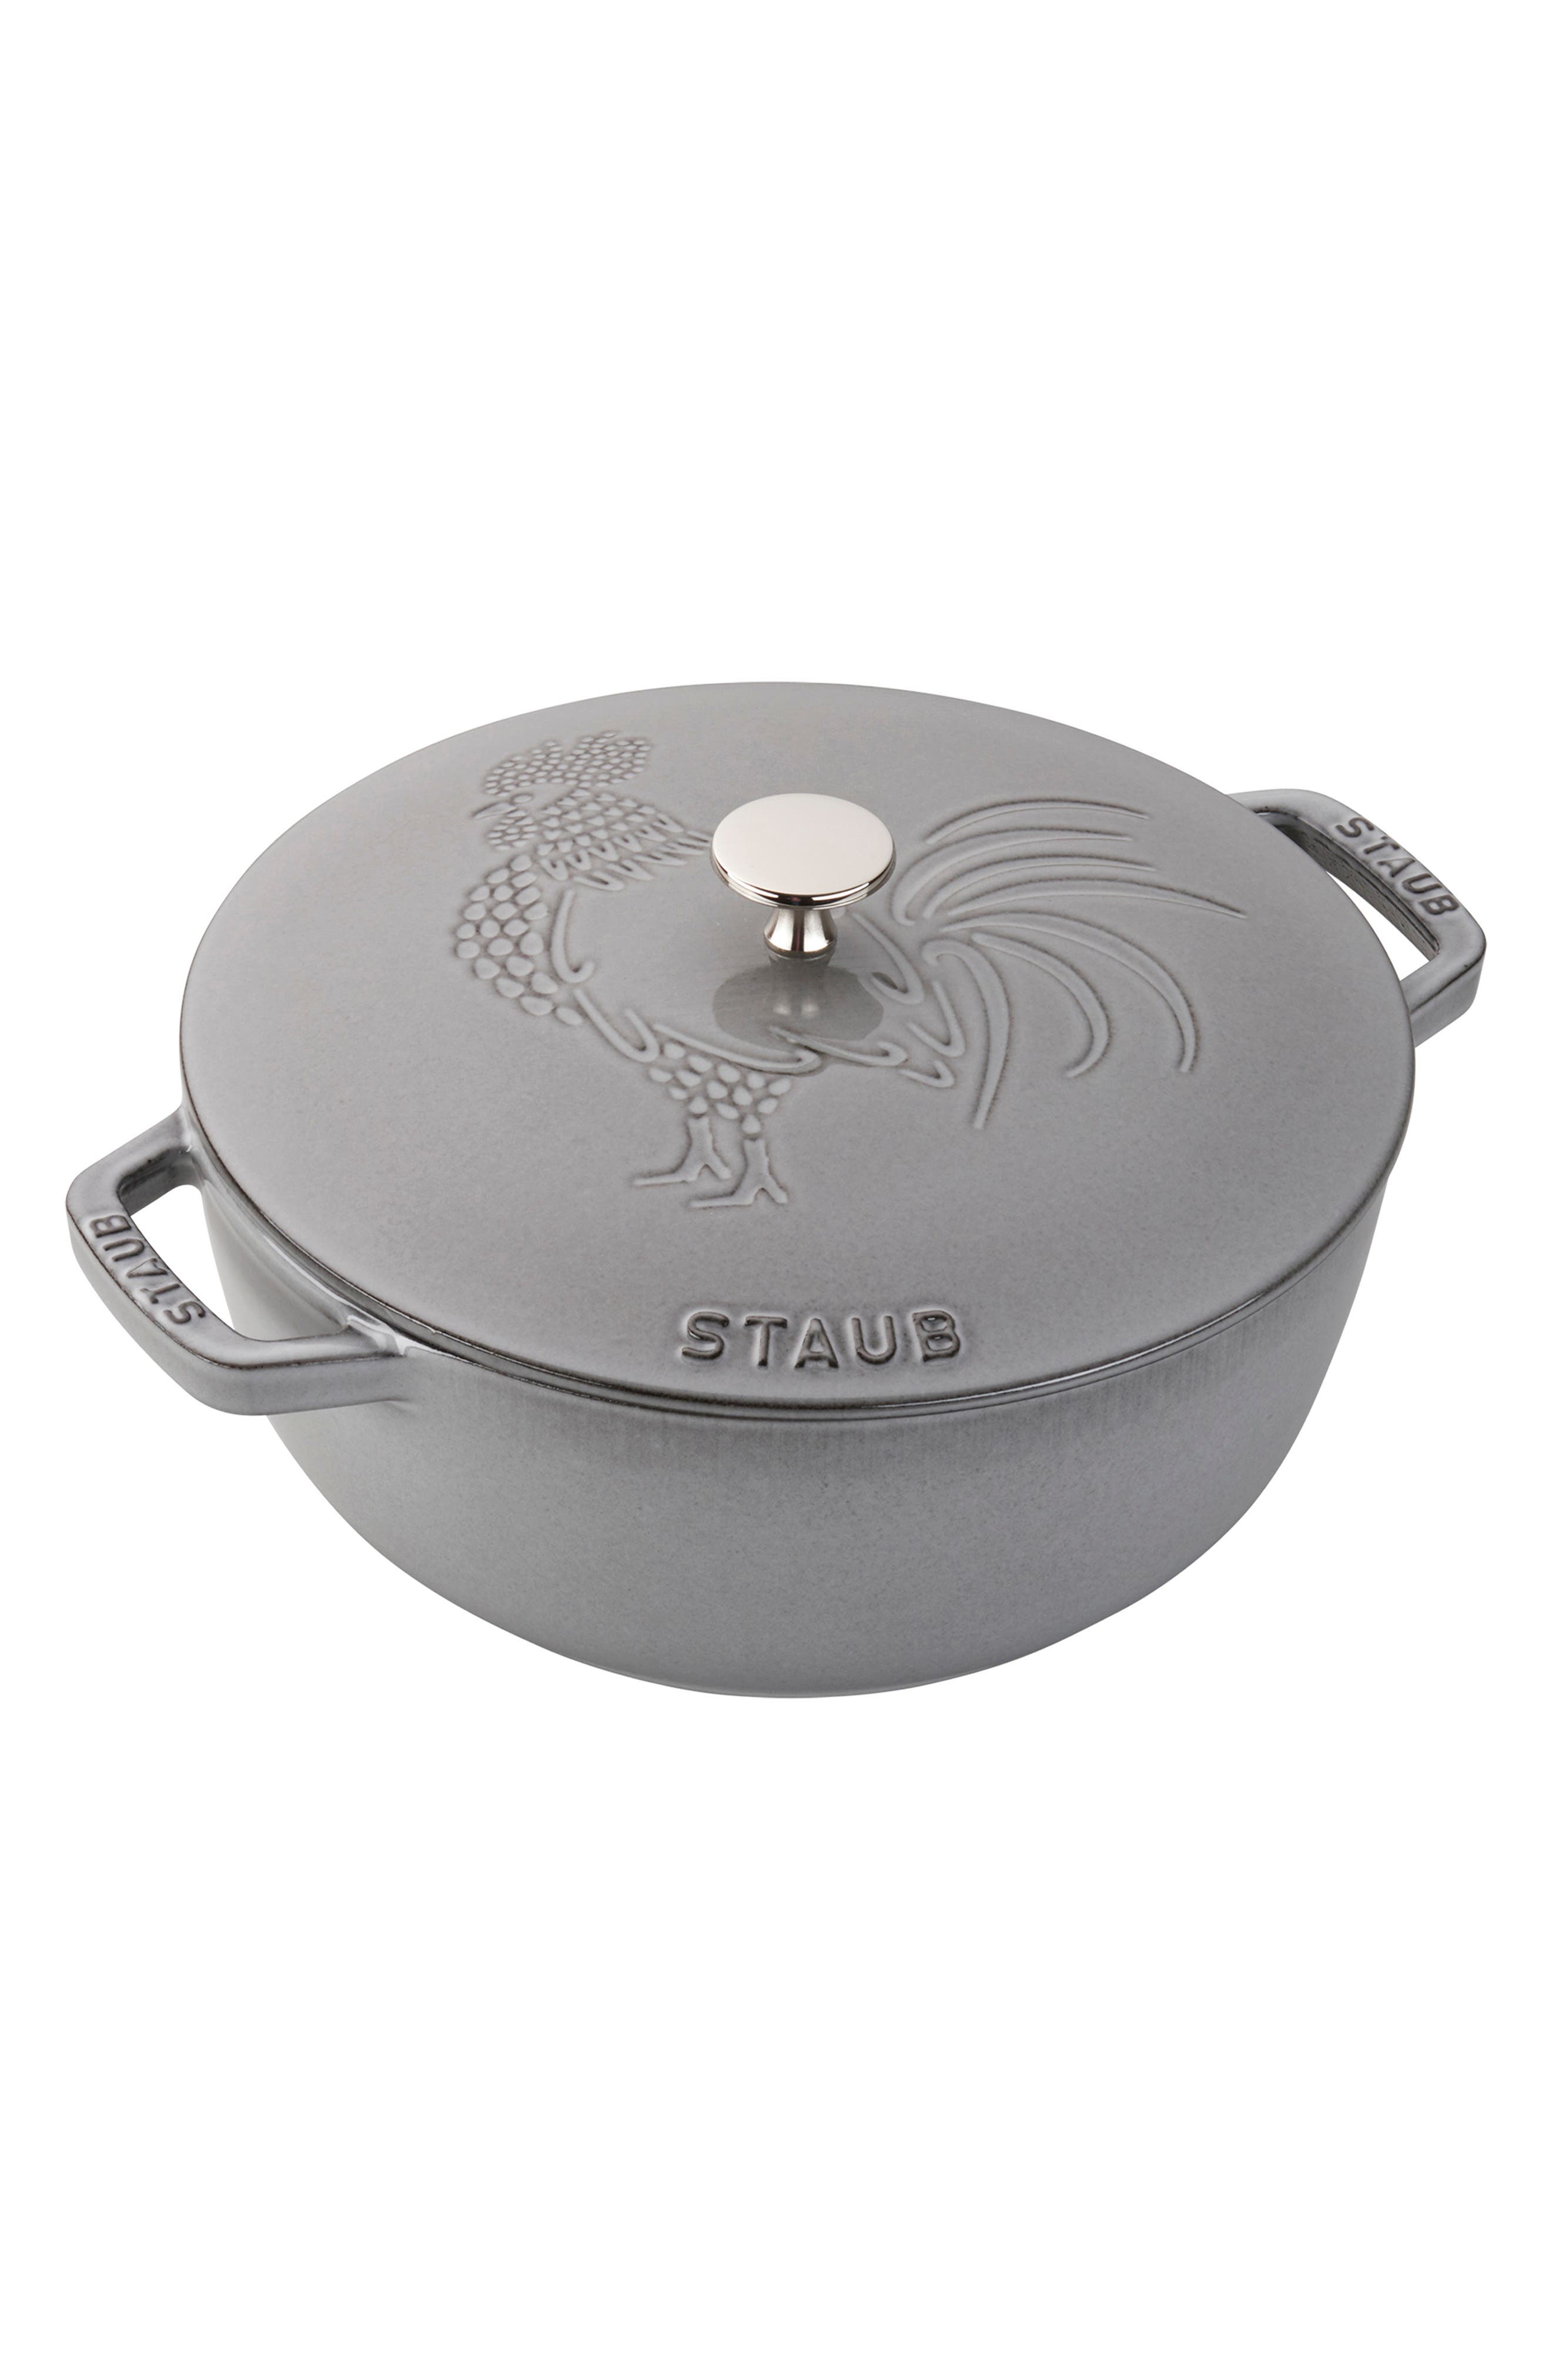 STAUB GRAPHITE GREY ESSENTIAL 3.75 QT. FRENCH OVEN & ROOSTER LID,872078023027